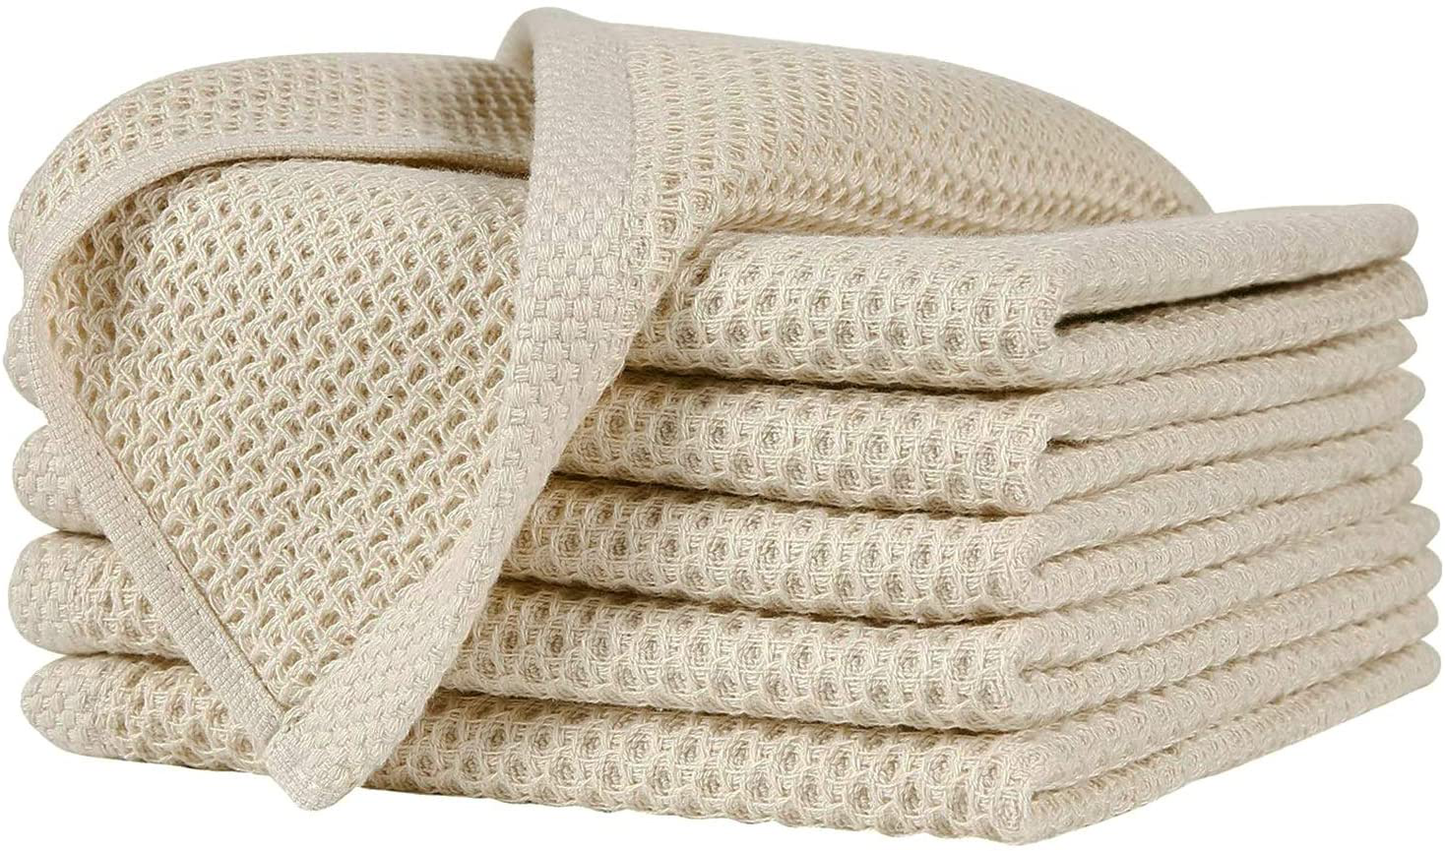 Homaxy 100% Cotton Waffle Weave Kitchen Dish Cloths, Ultra Soft Absorbent Quick Drying Dish Towels, 12x12 Inches, 6-Pack, Beige